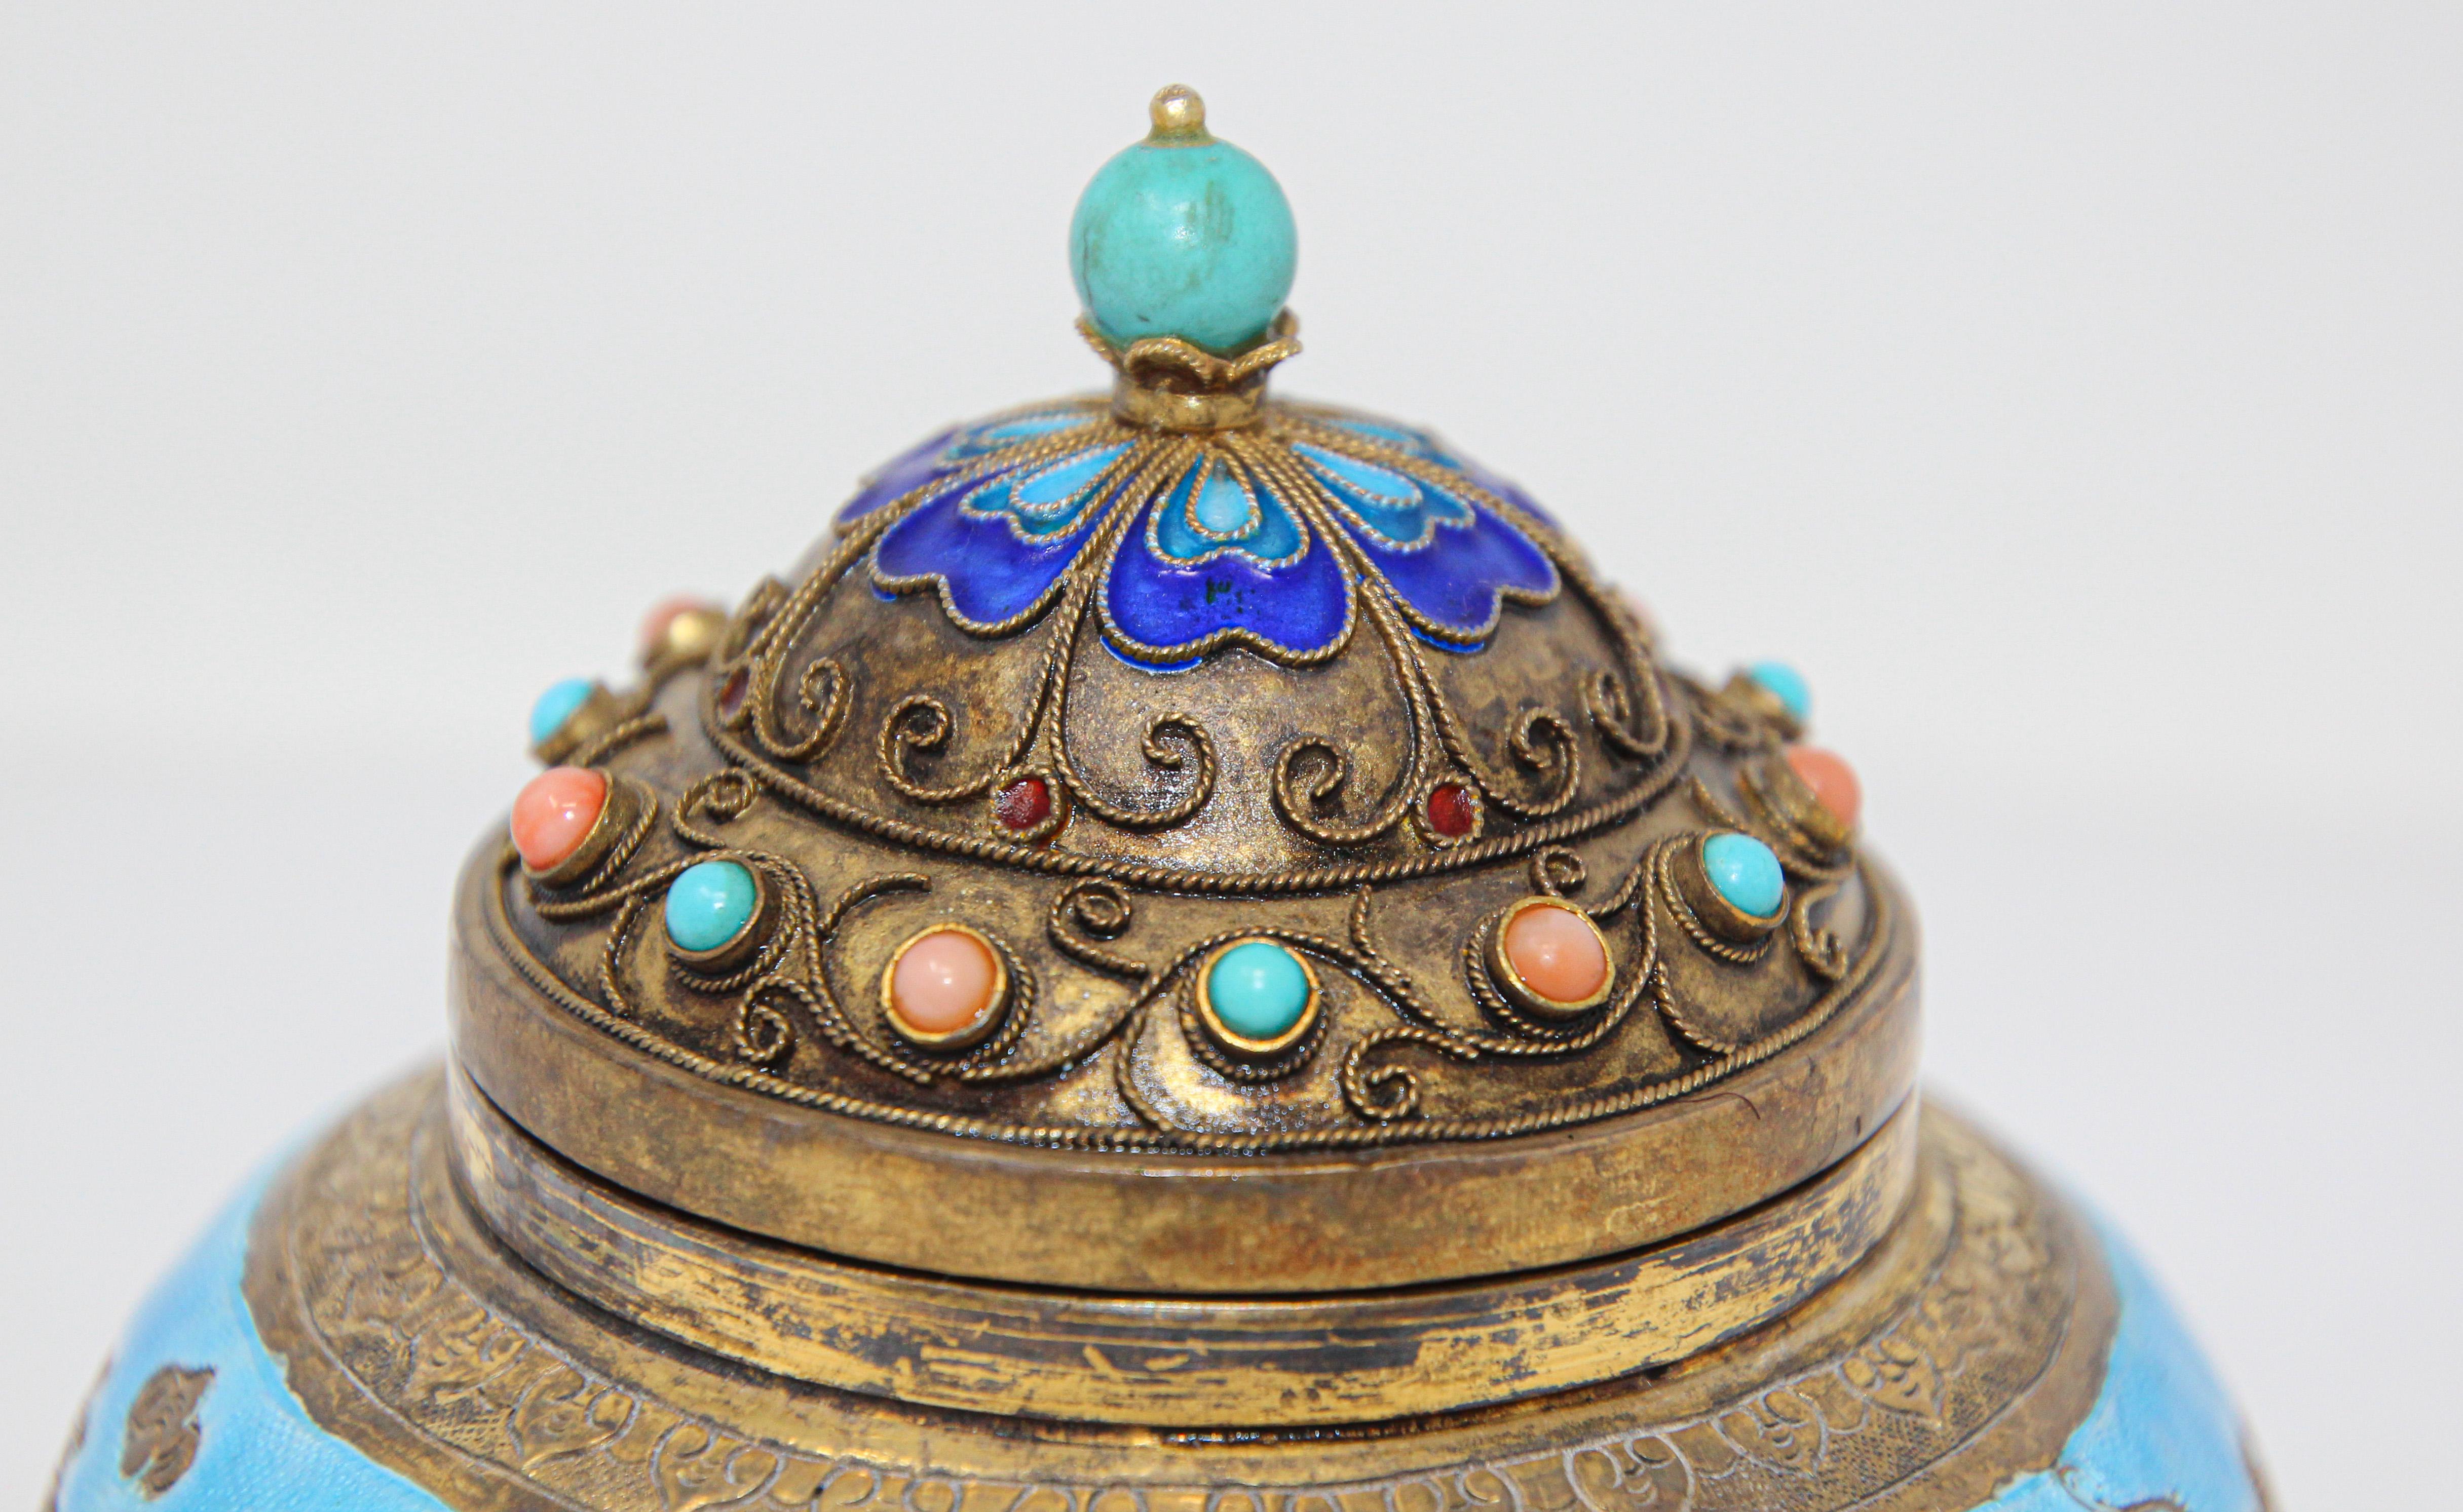 Beaded Chinese Export Brass Snuff Box with Turquoise Enamel Dragons and Beads Inlaid